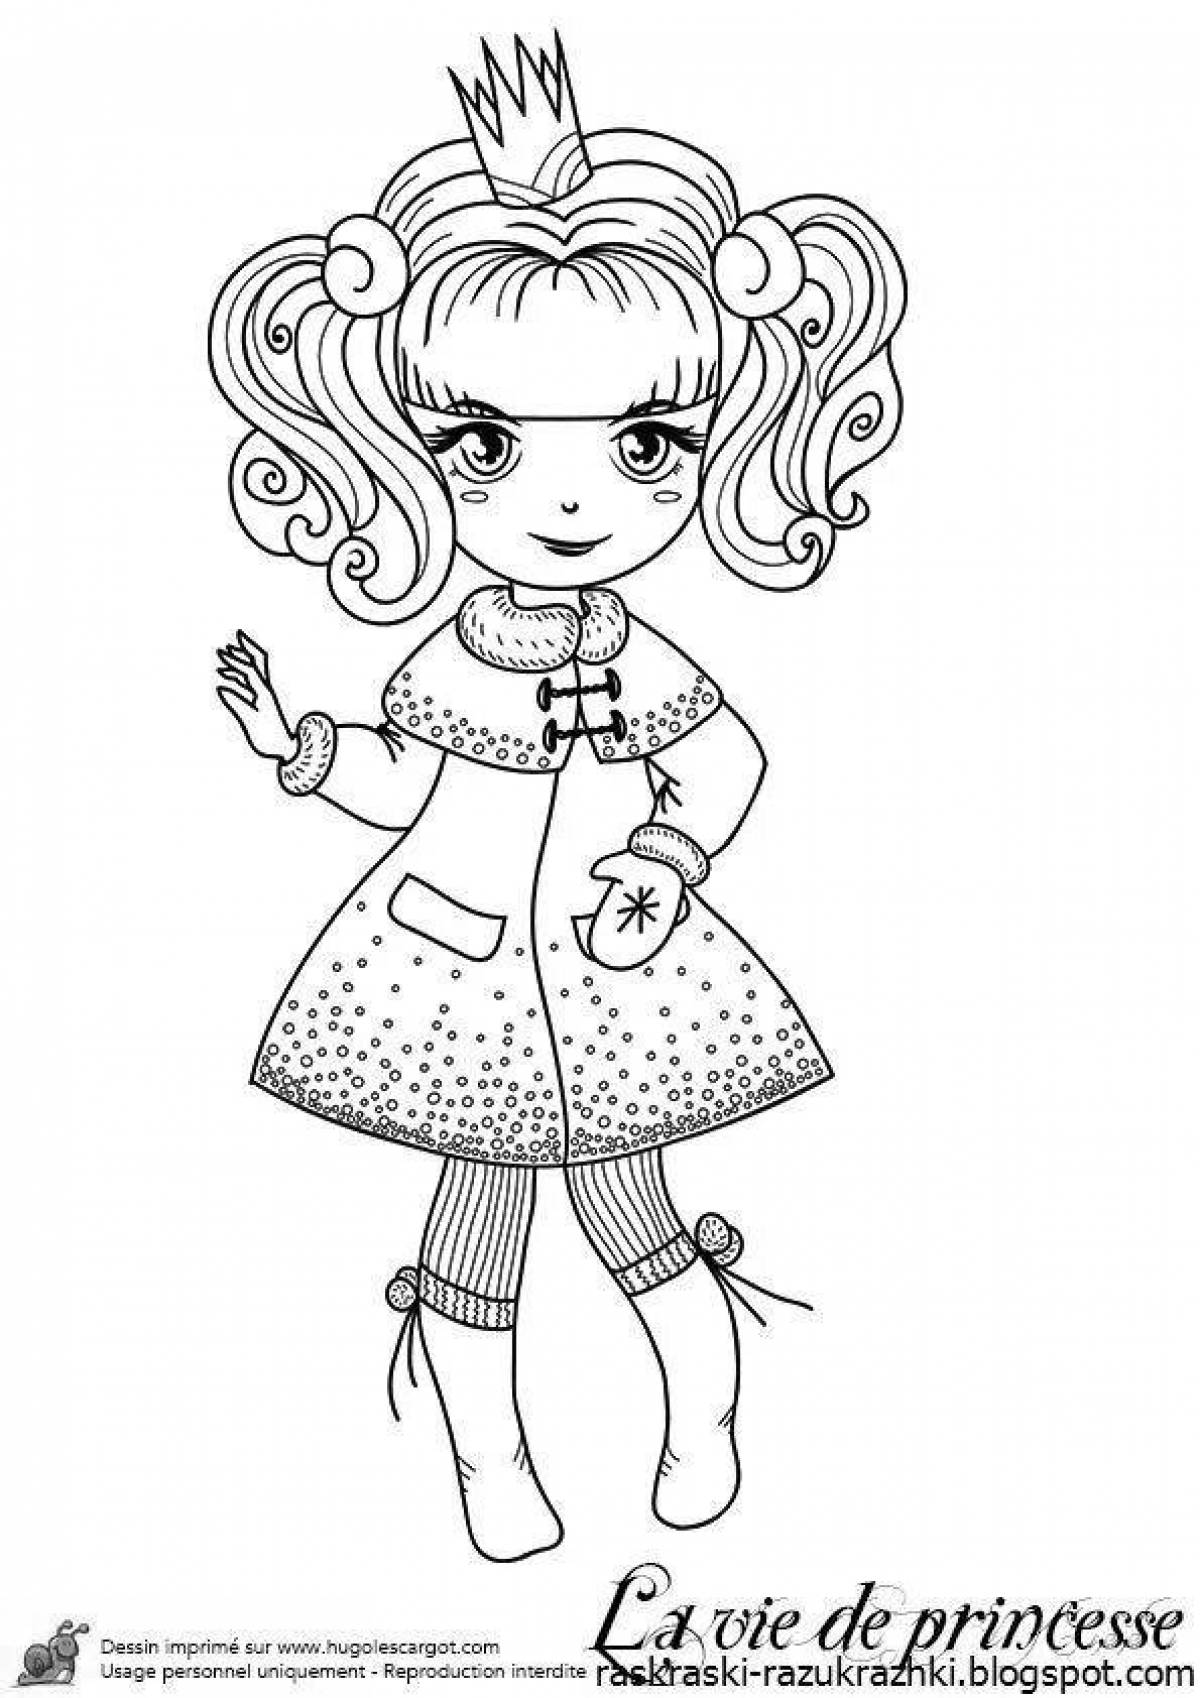 Colorful coloring pages for doll girls